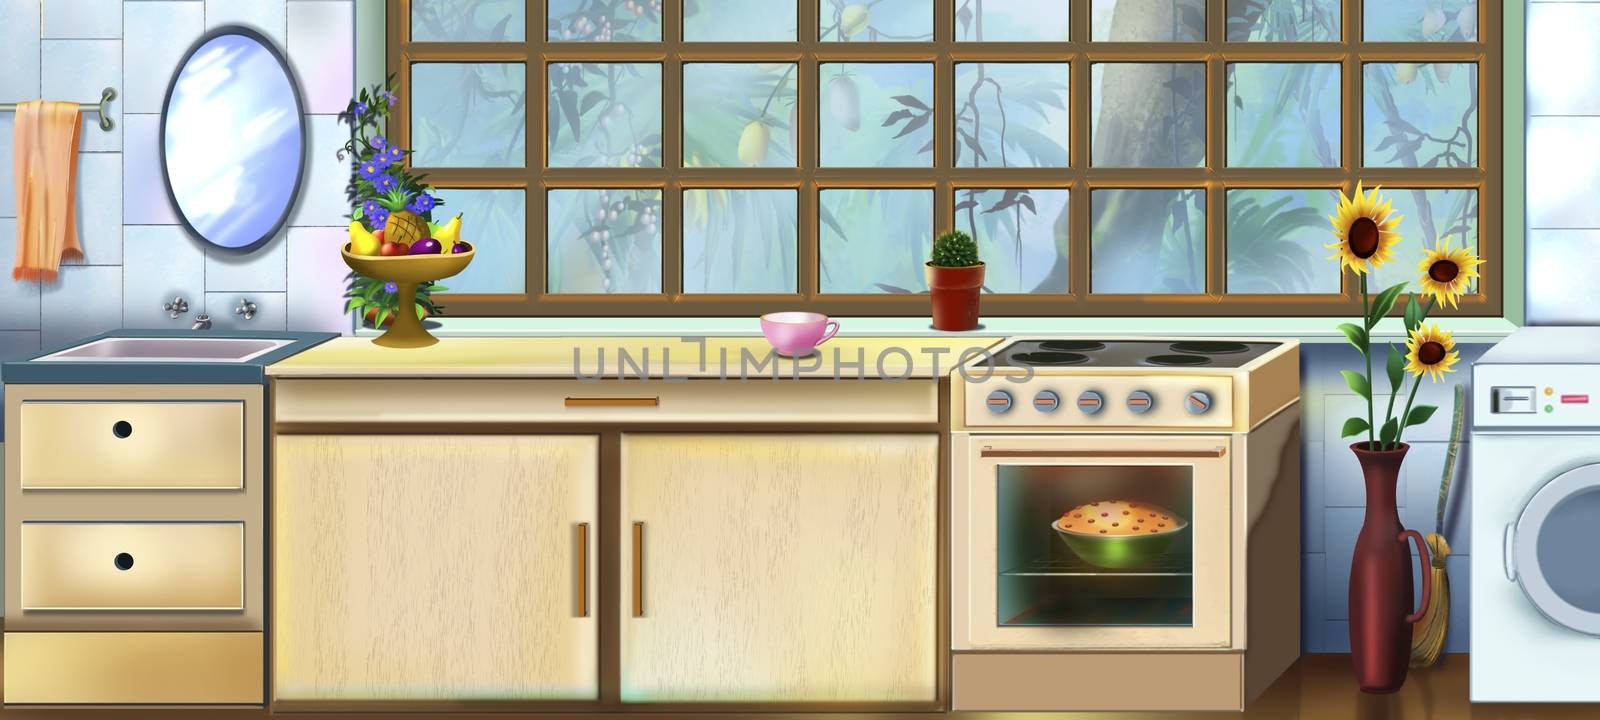 Digital painting of the Vintage Kitchen